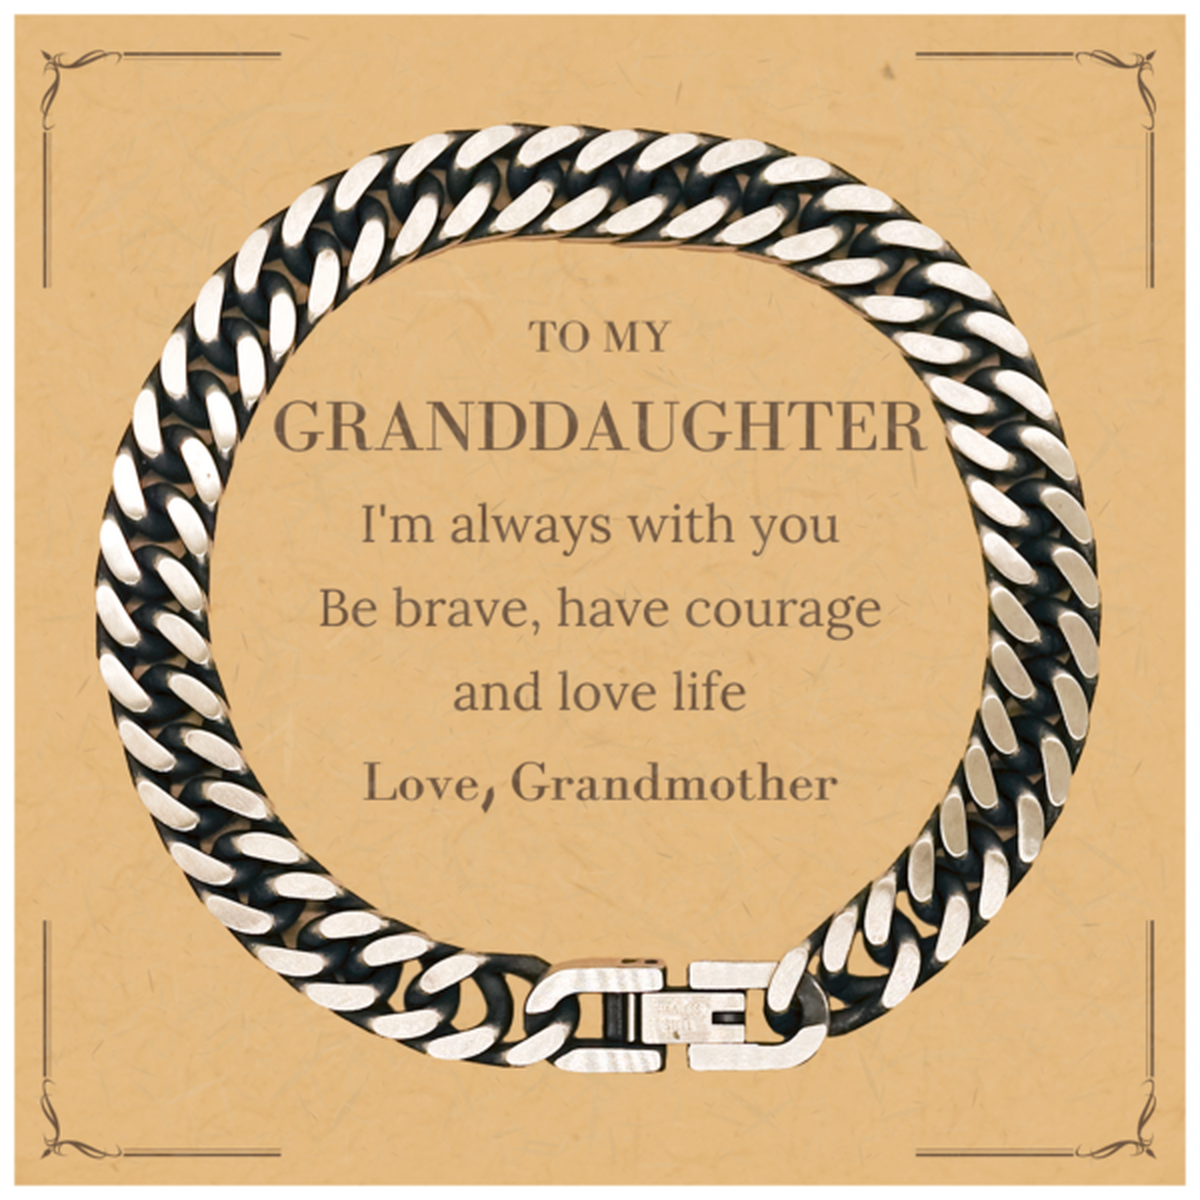 To My Granddaughter Gifts from Grandmother, Unique Cuban Link Chain Bracelet Inspirational Christmas Birthday Graduation Gifts for Granddaughter I'm always with you. Be brave, have courage and love life. Love, Grandmother